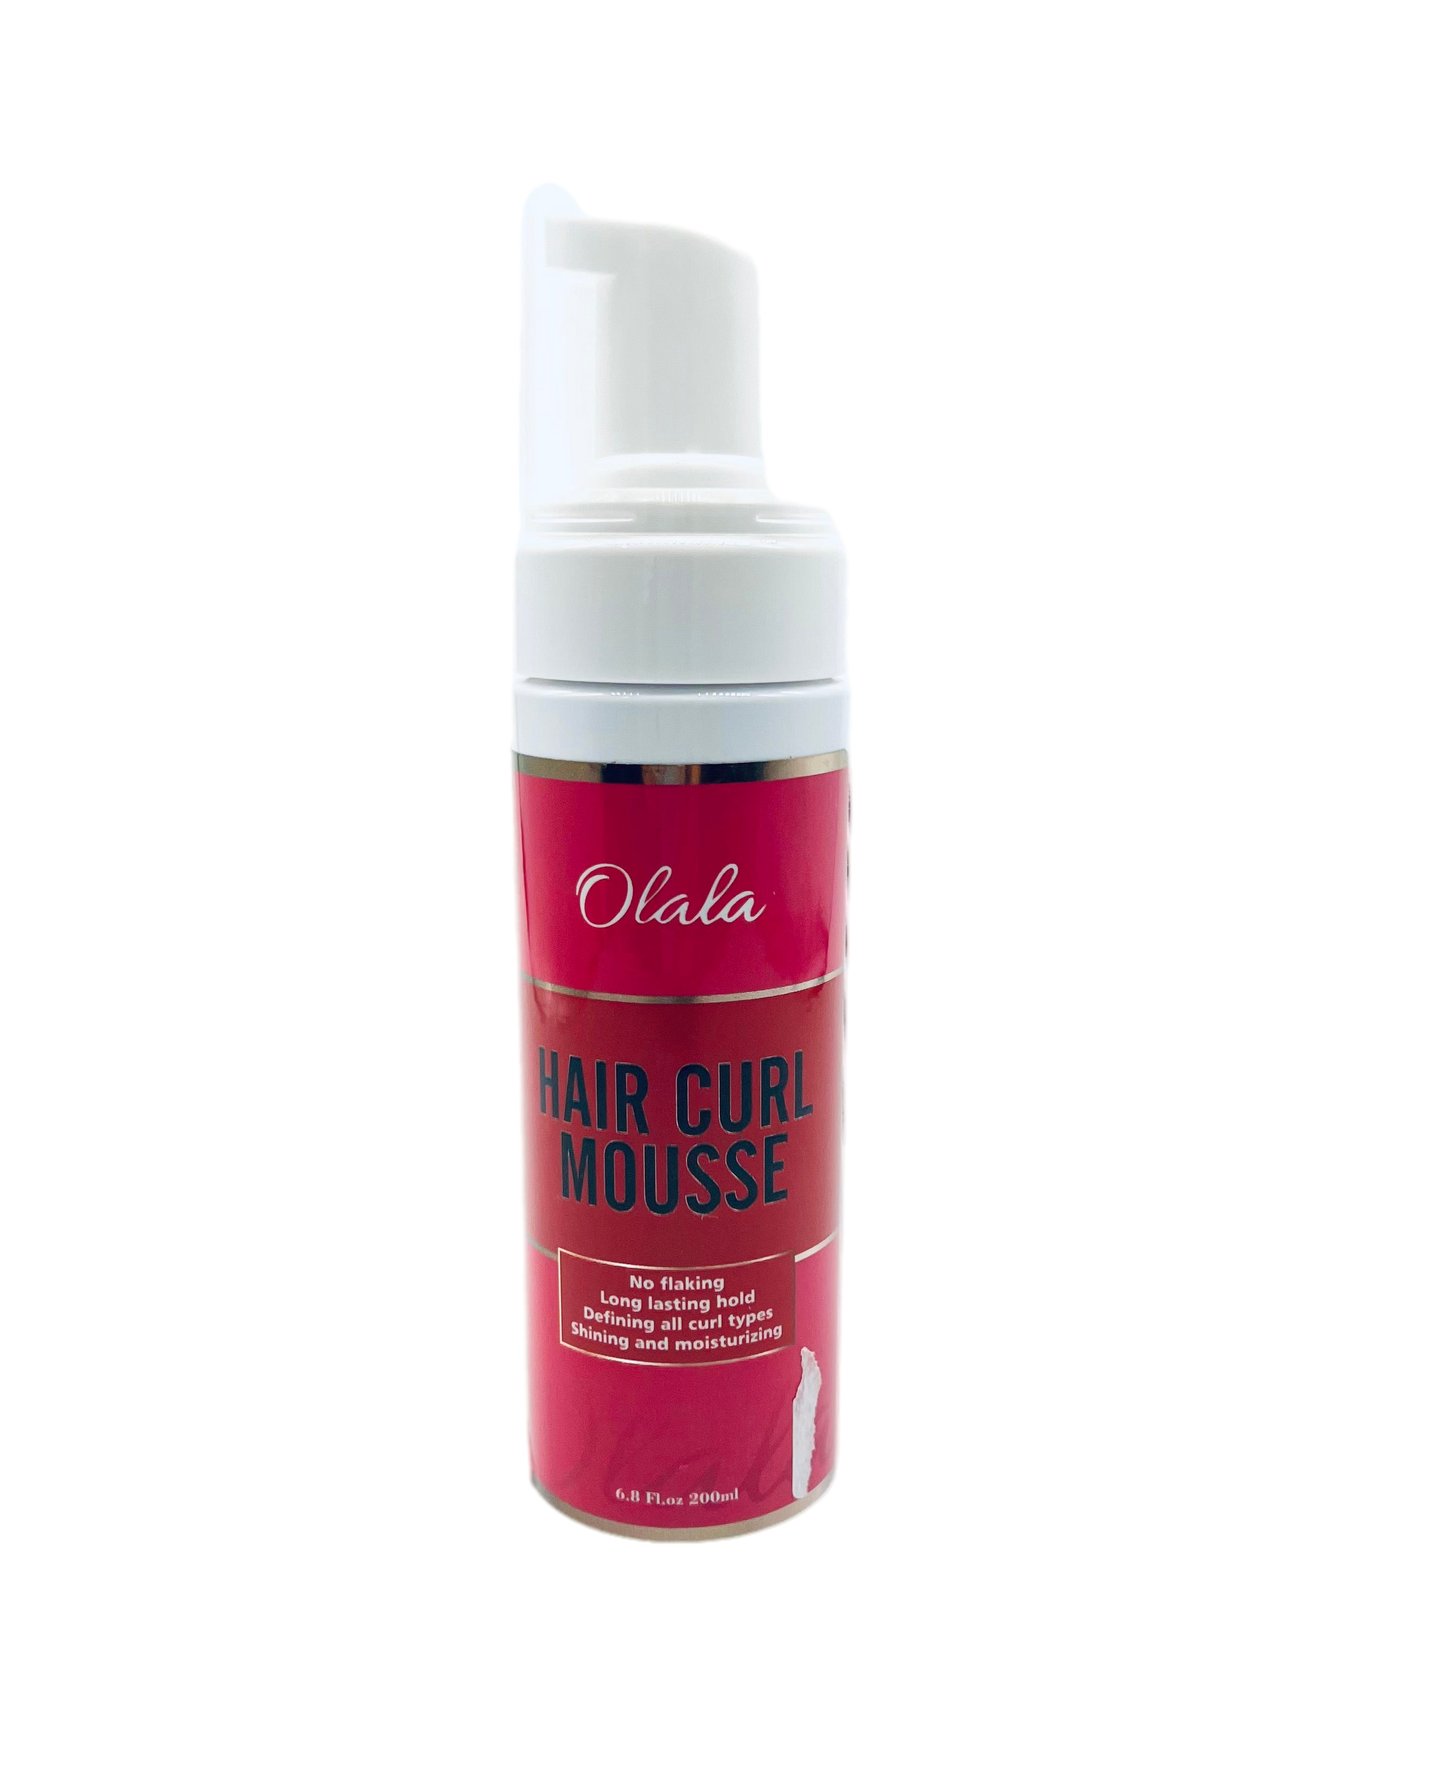 Olala Hair Curl Mousse  6.8 oz - VIP Extensions